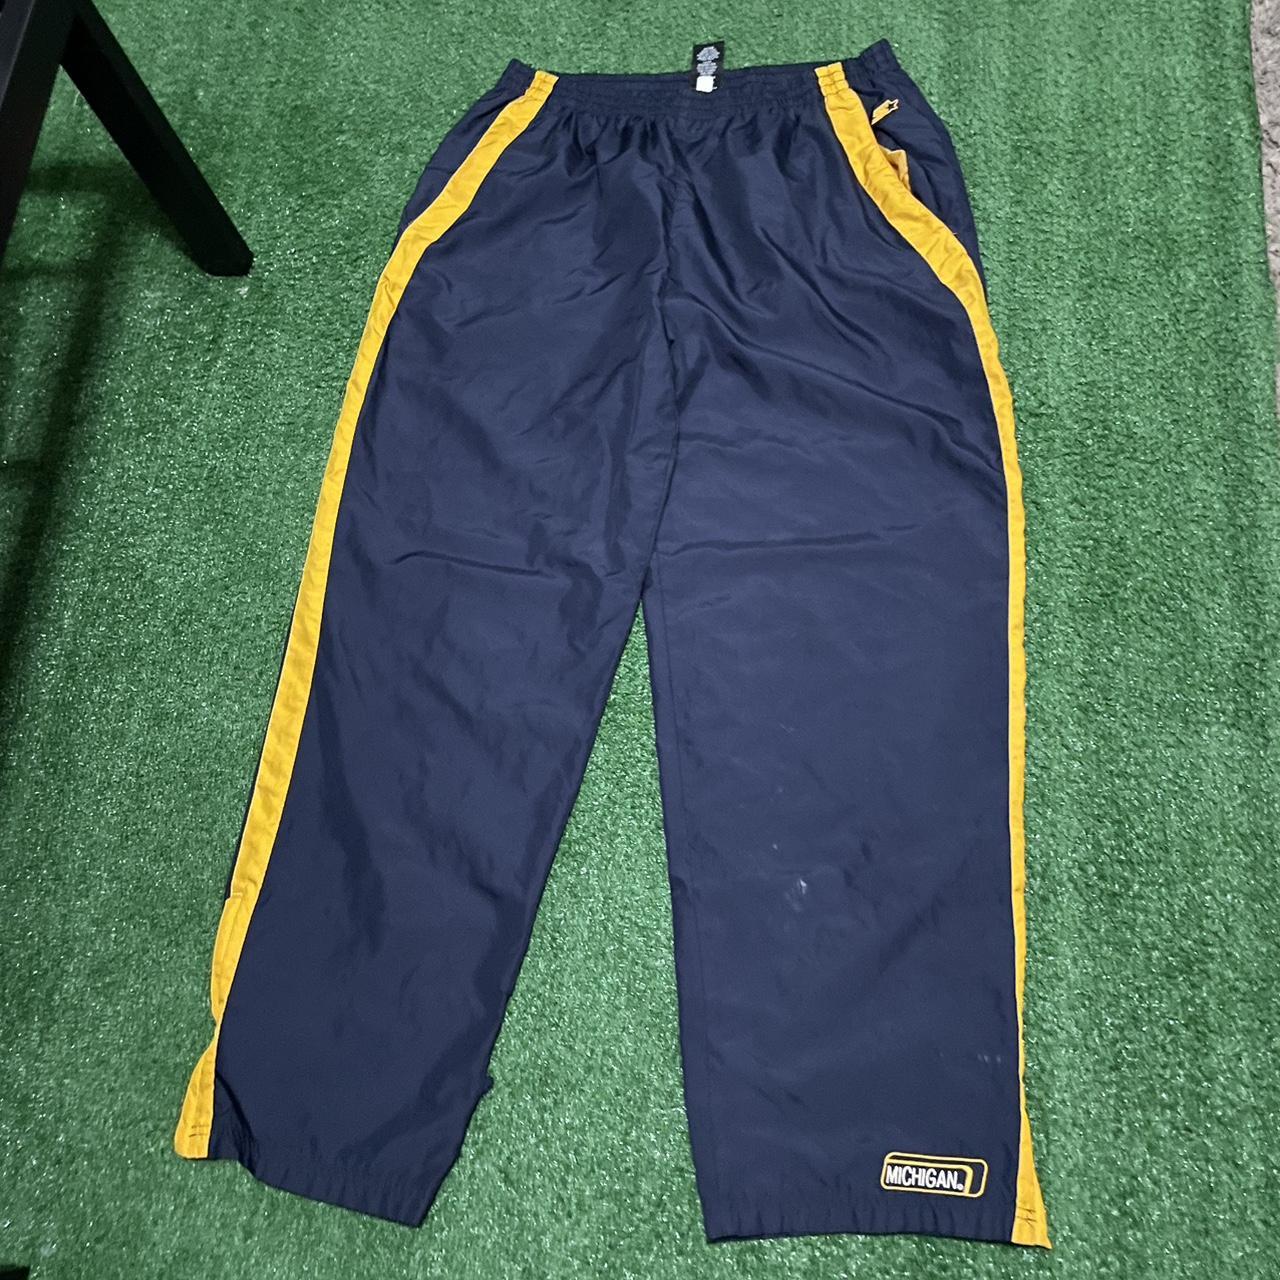 Men's Navy and Yellow Joggers-tracksuits | Depop